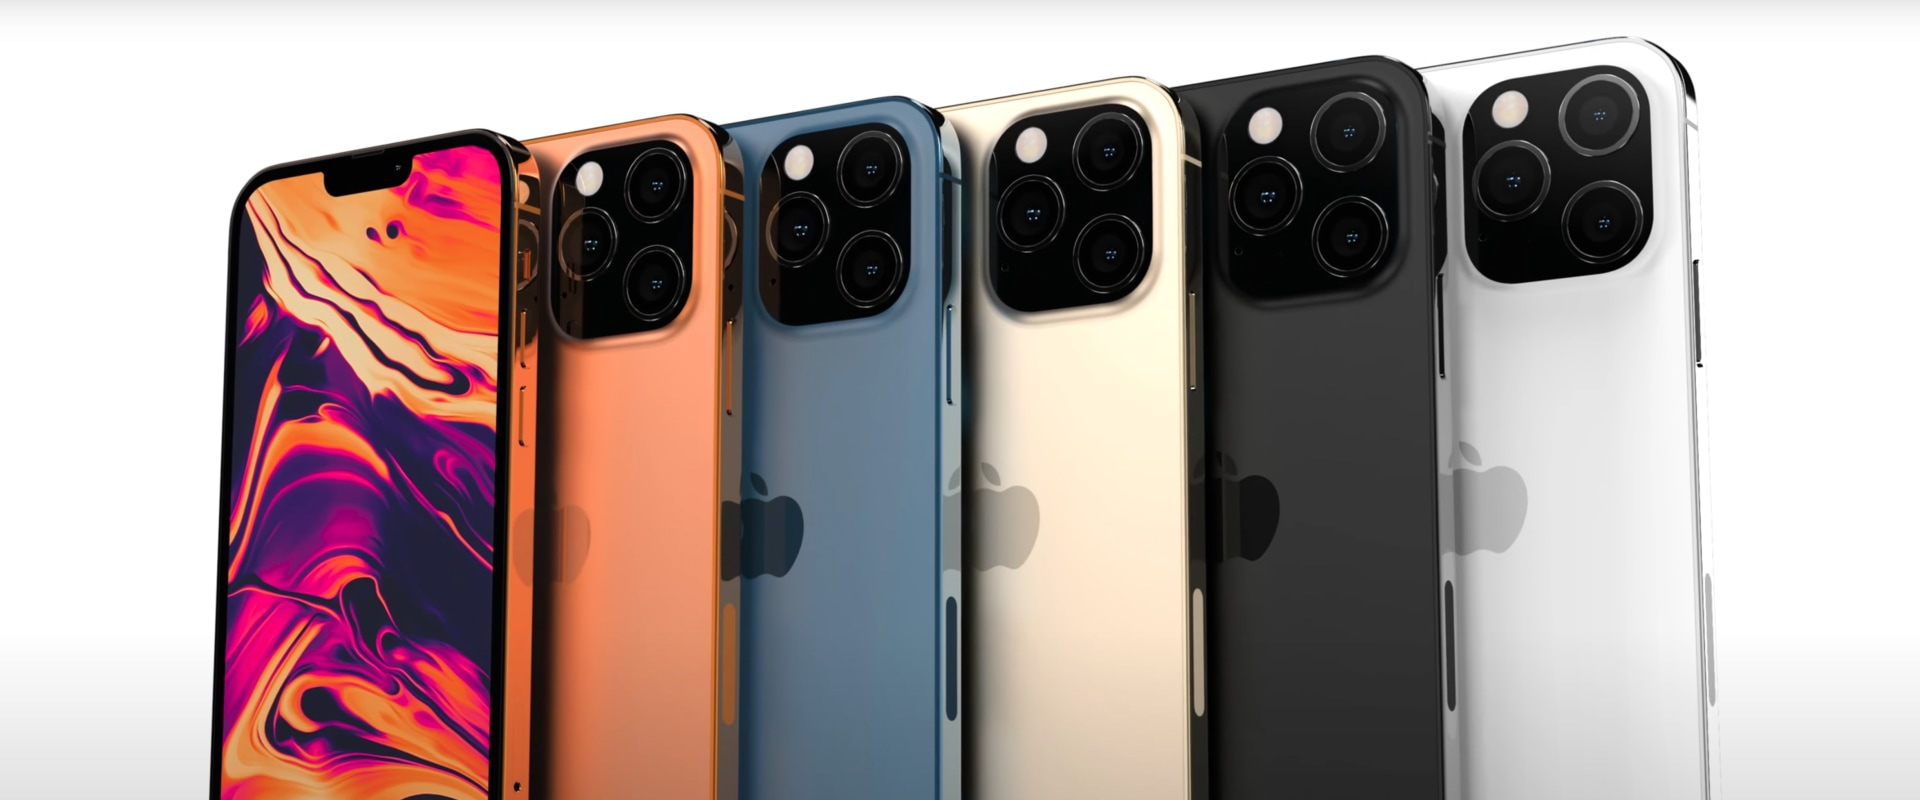 Is there a shortage on iphone 13 stocks?